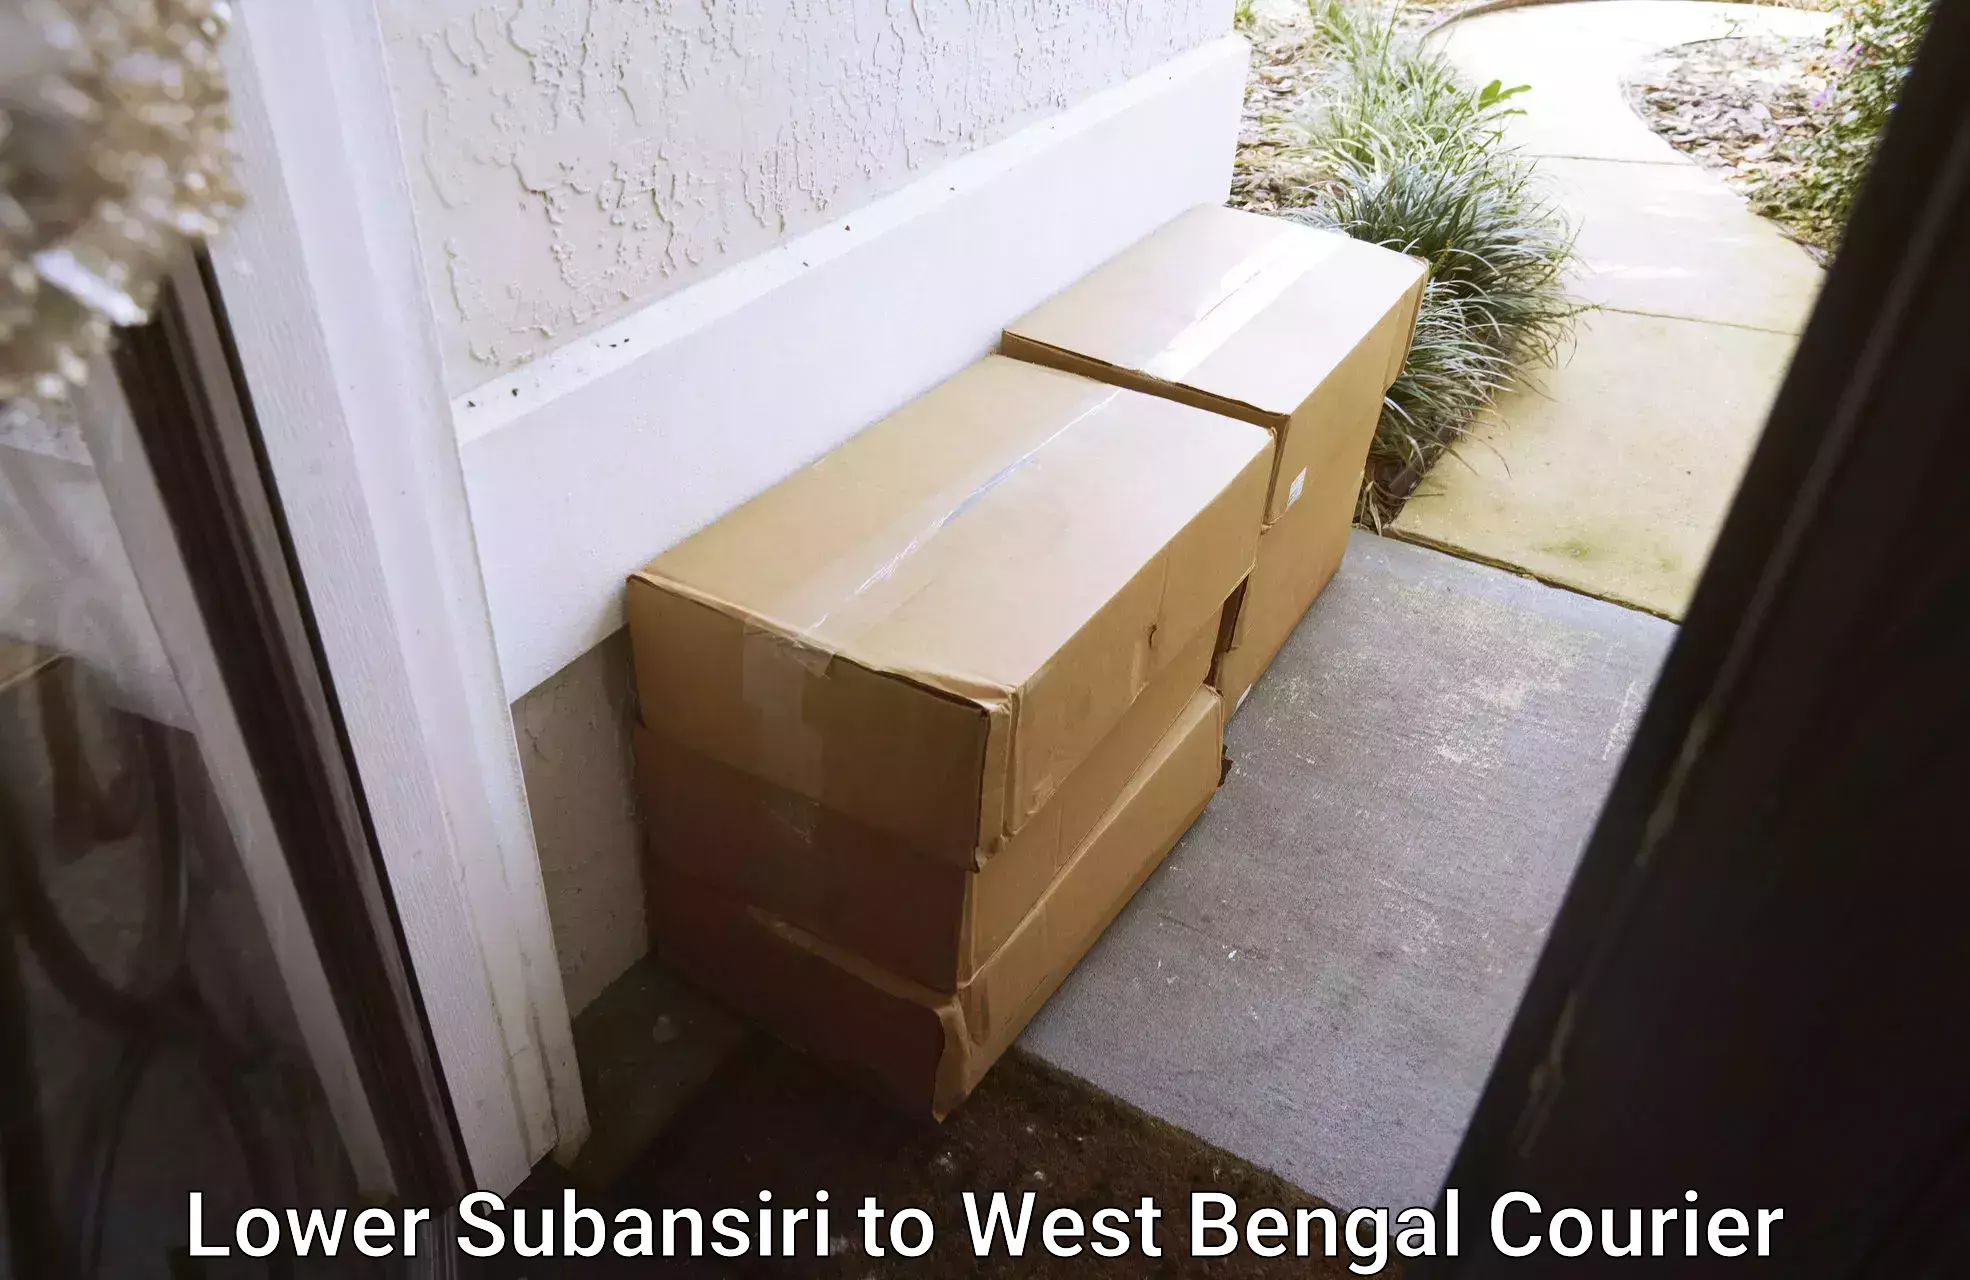 Local courier options Lower Subansiri to West Bengal